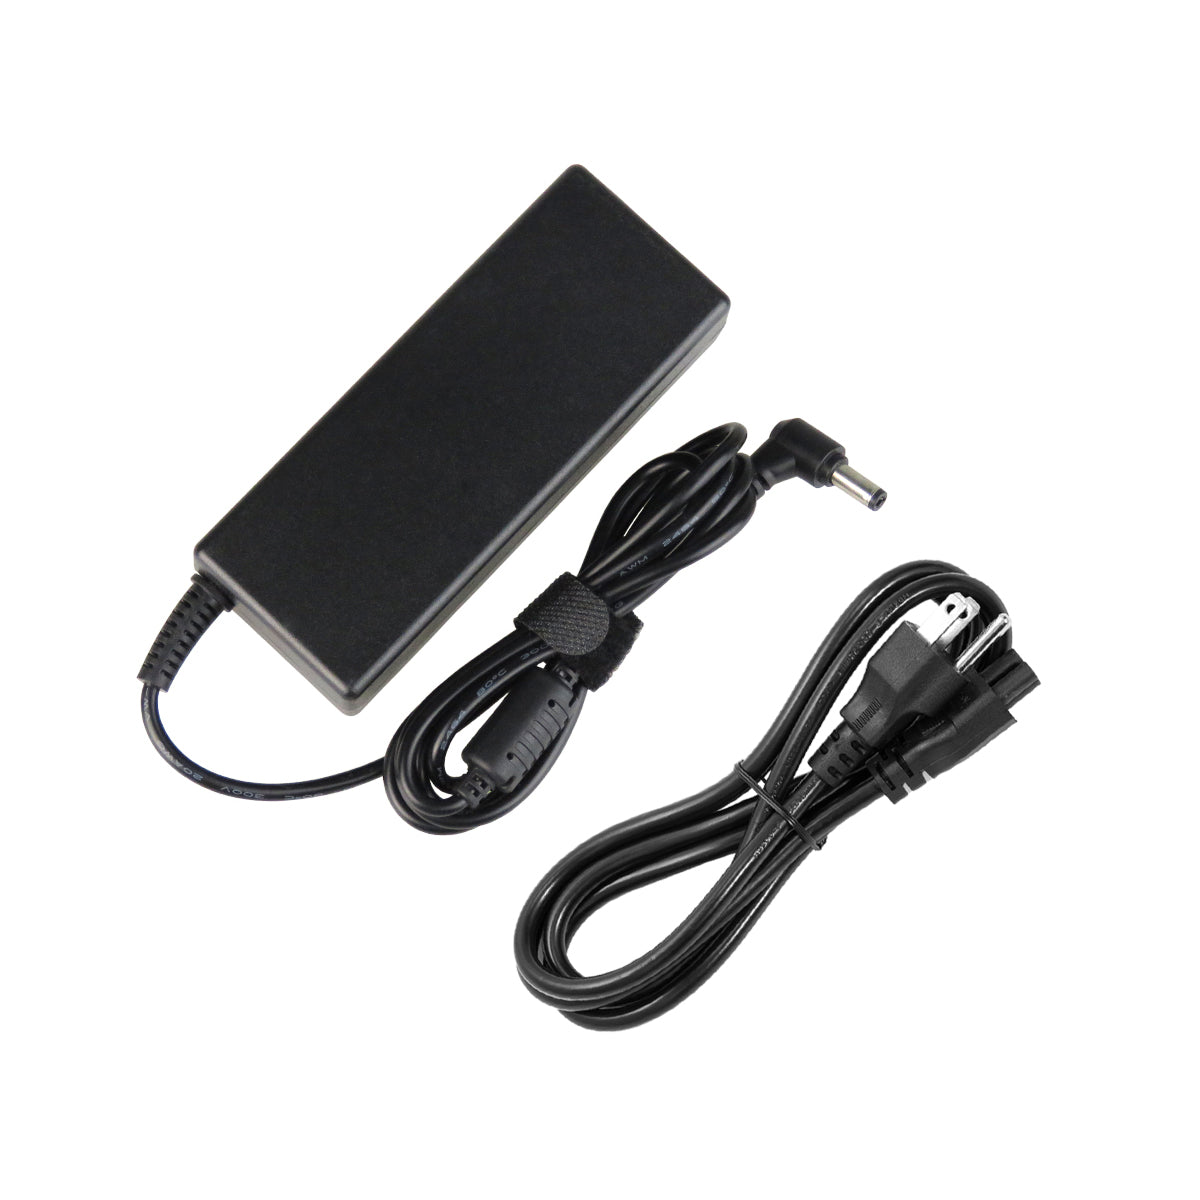 AC Adapter Charger for ASUS K73BR Laptop.